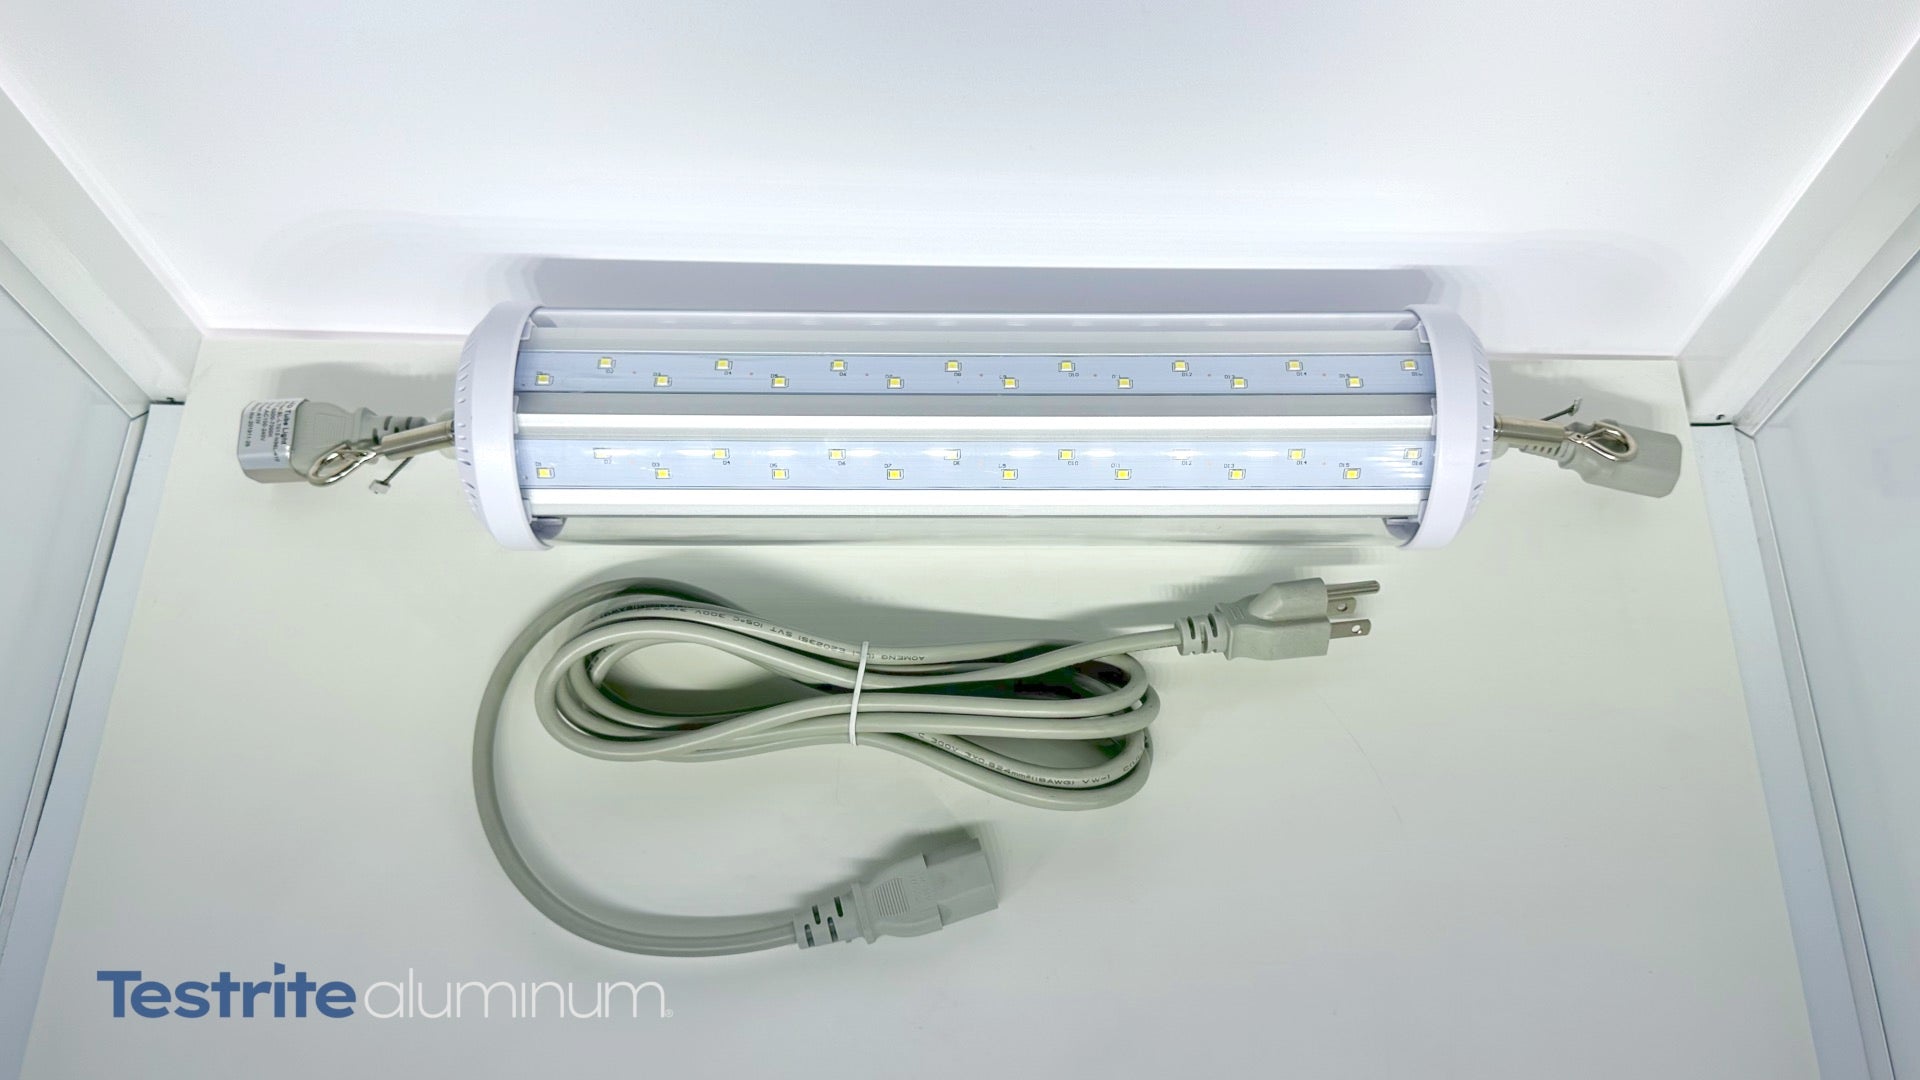 Torpedo LED light with included power cable